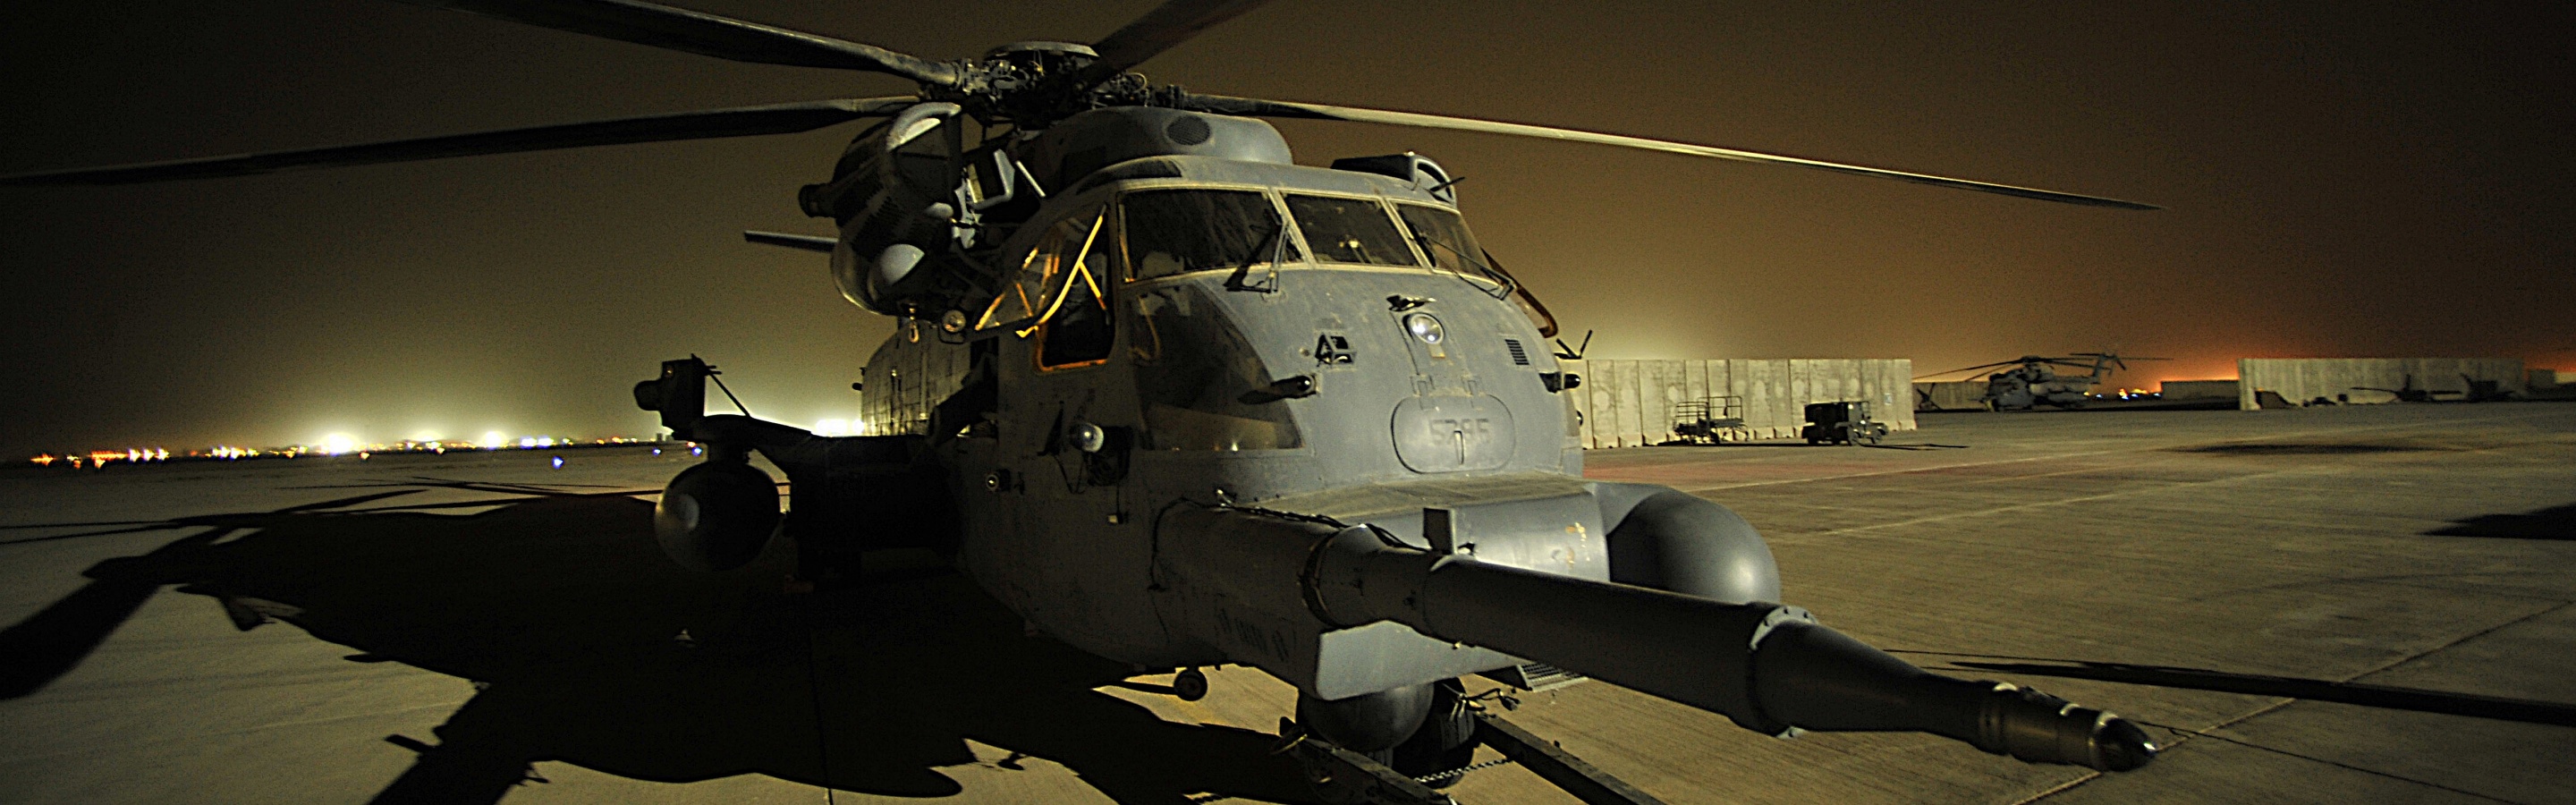 Helicopter - Sikorsky MH-53 Pave Low